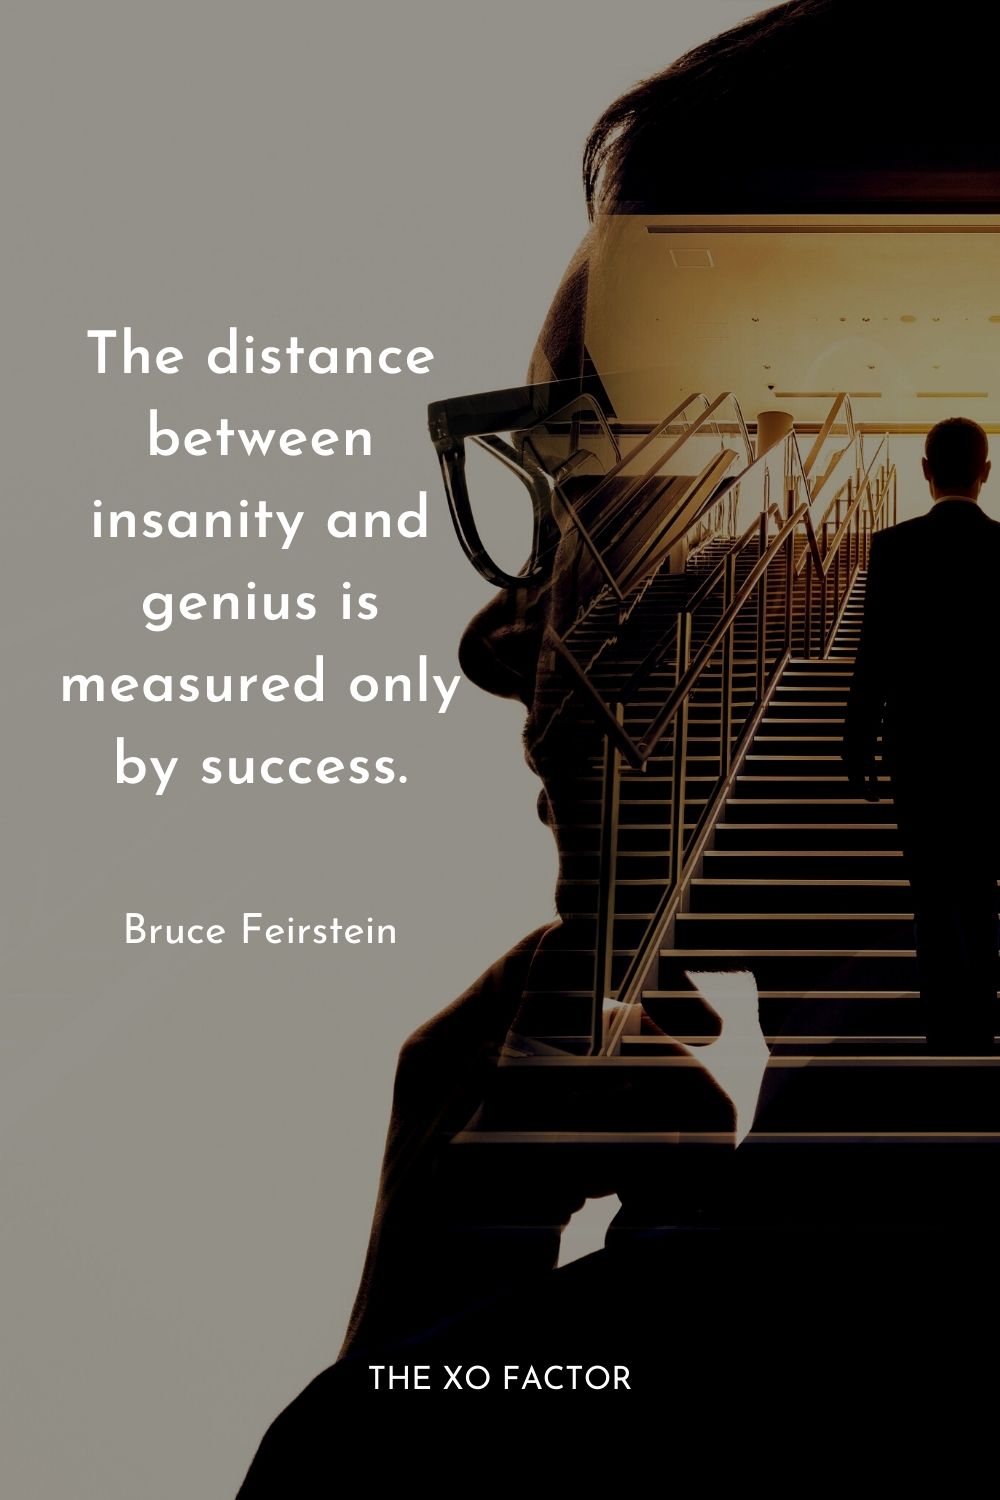 The distance between insanity and genius is measured only by success.